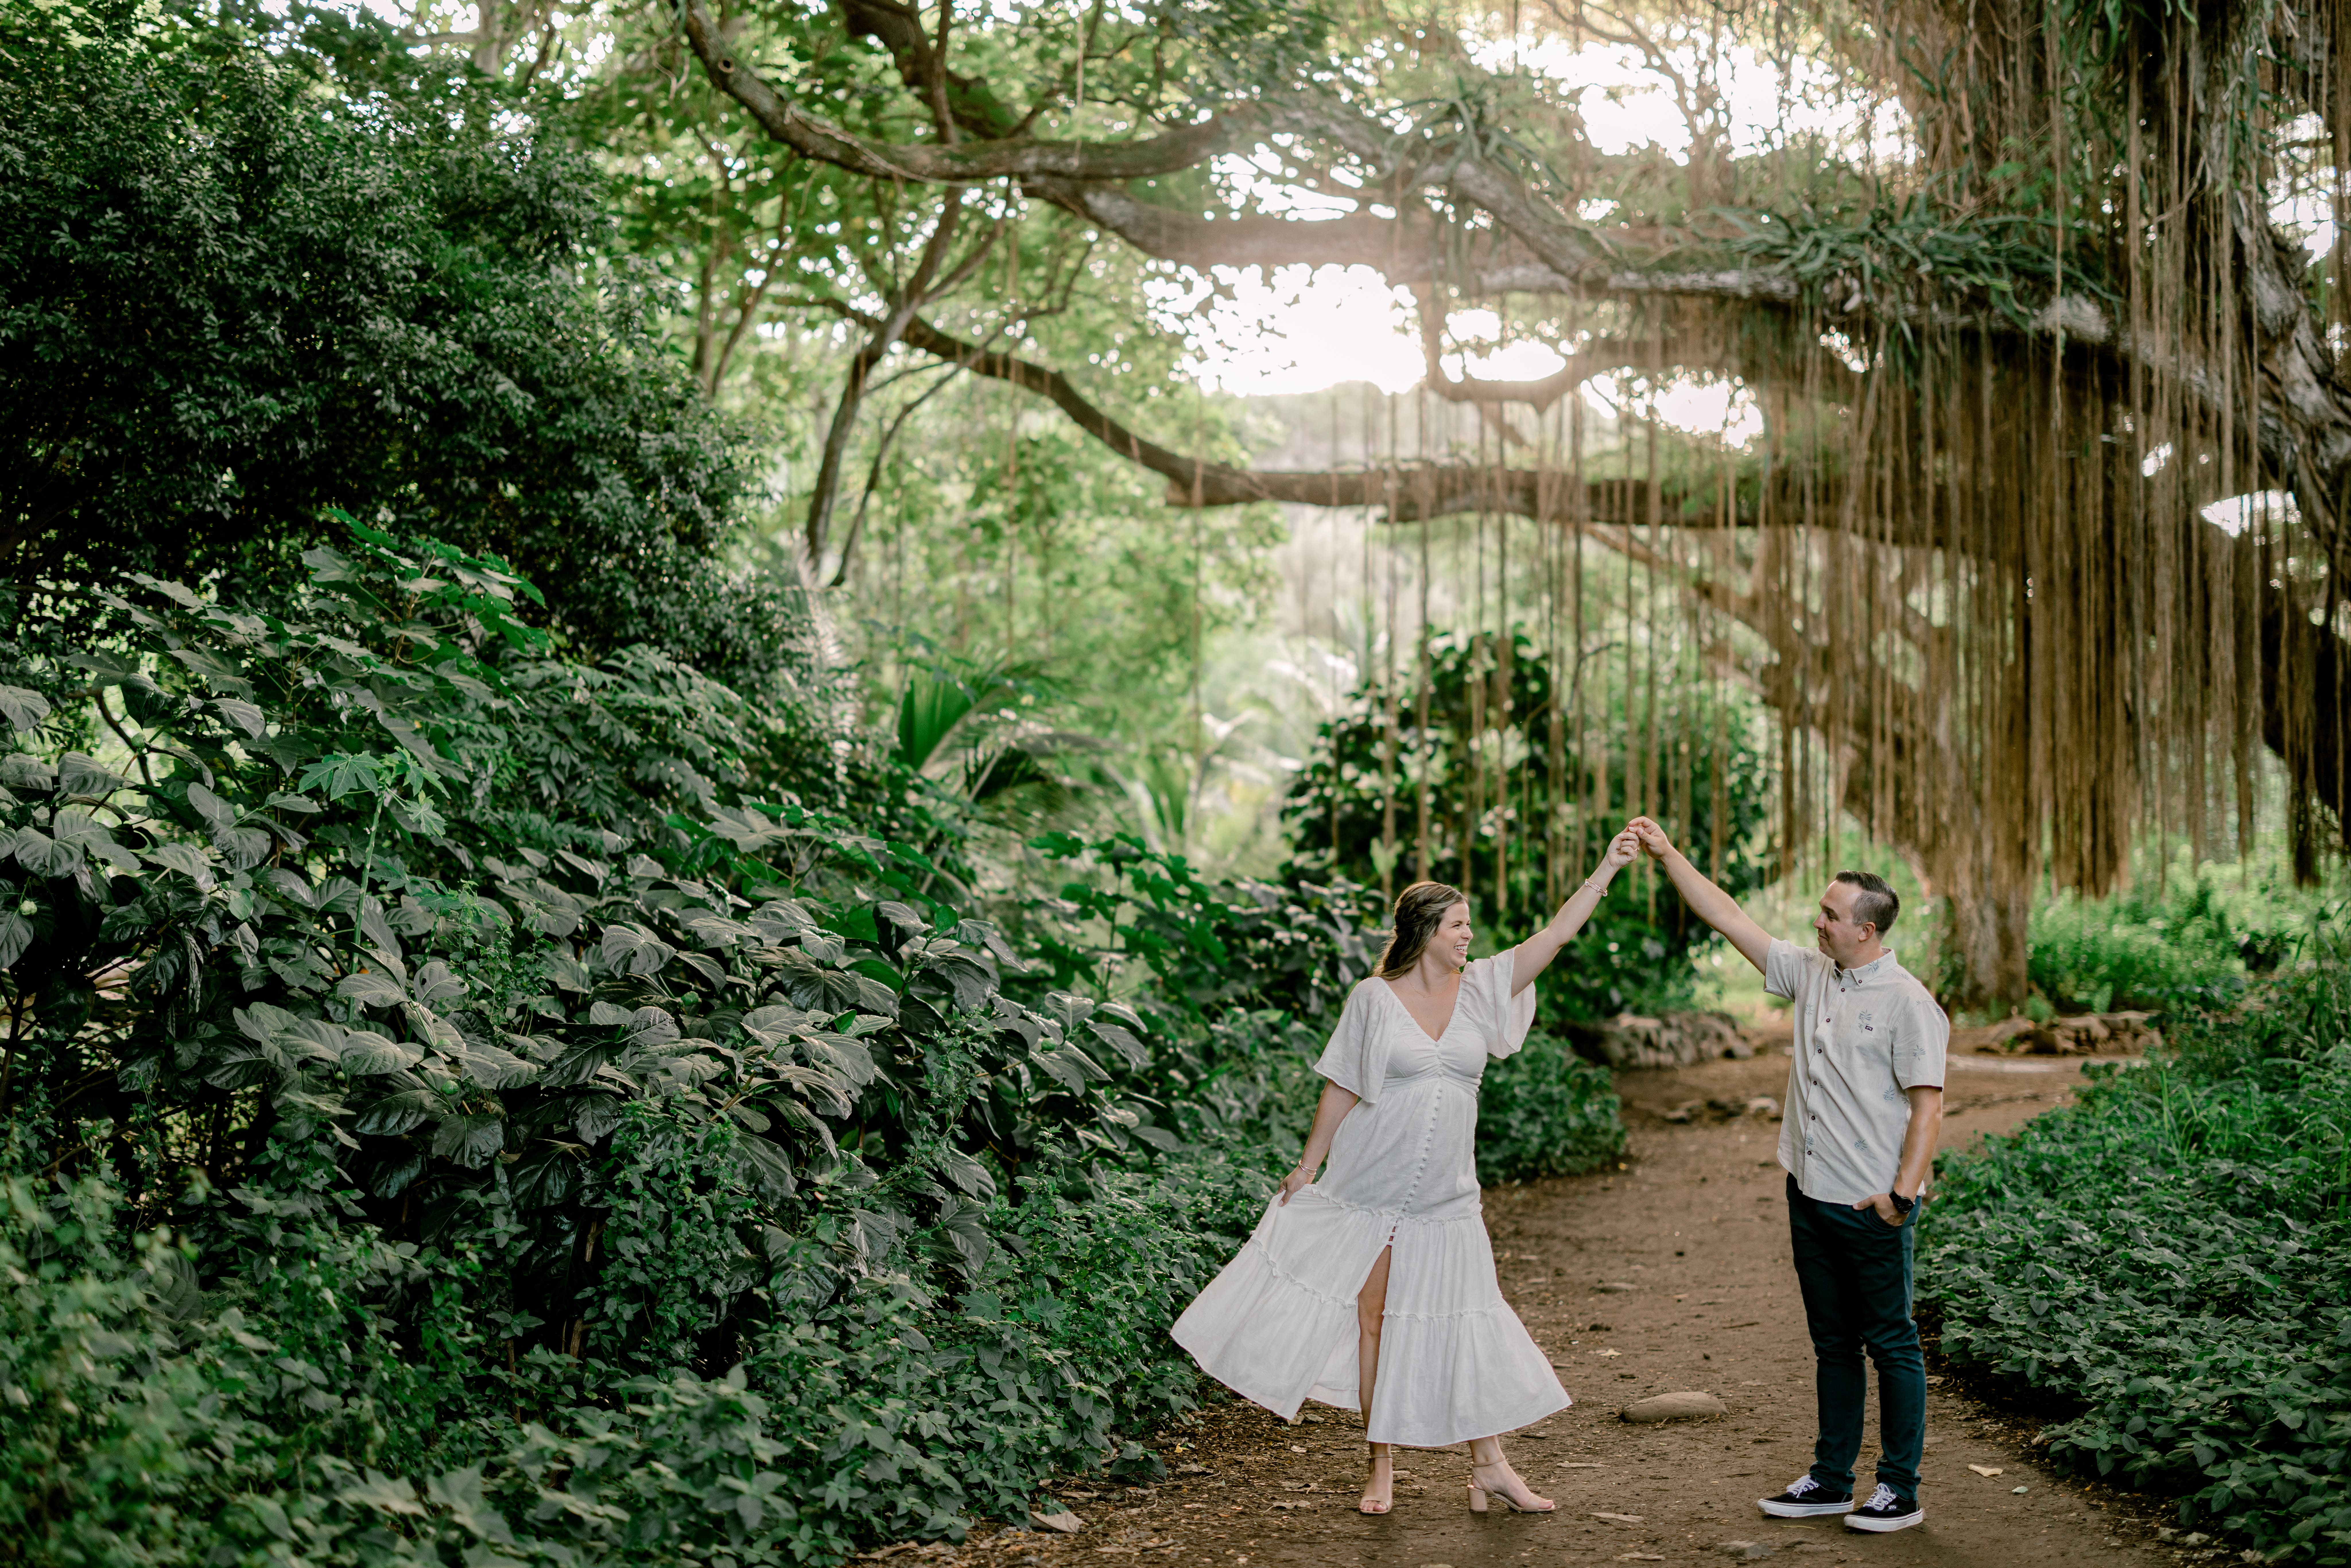 Maui Engagement Photography Session at Honolua Forest of guy and girl holding hands in the air and girl fanning her dress.